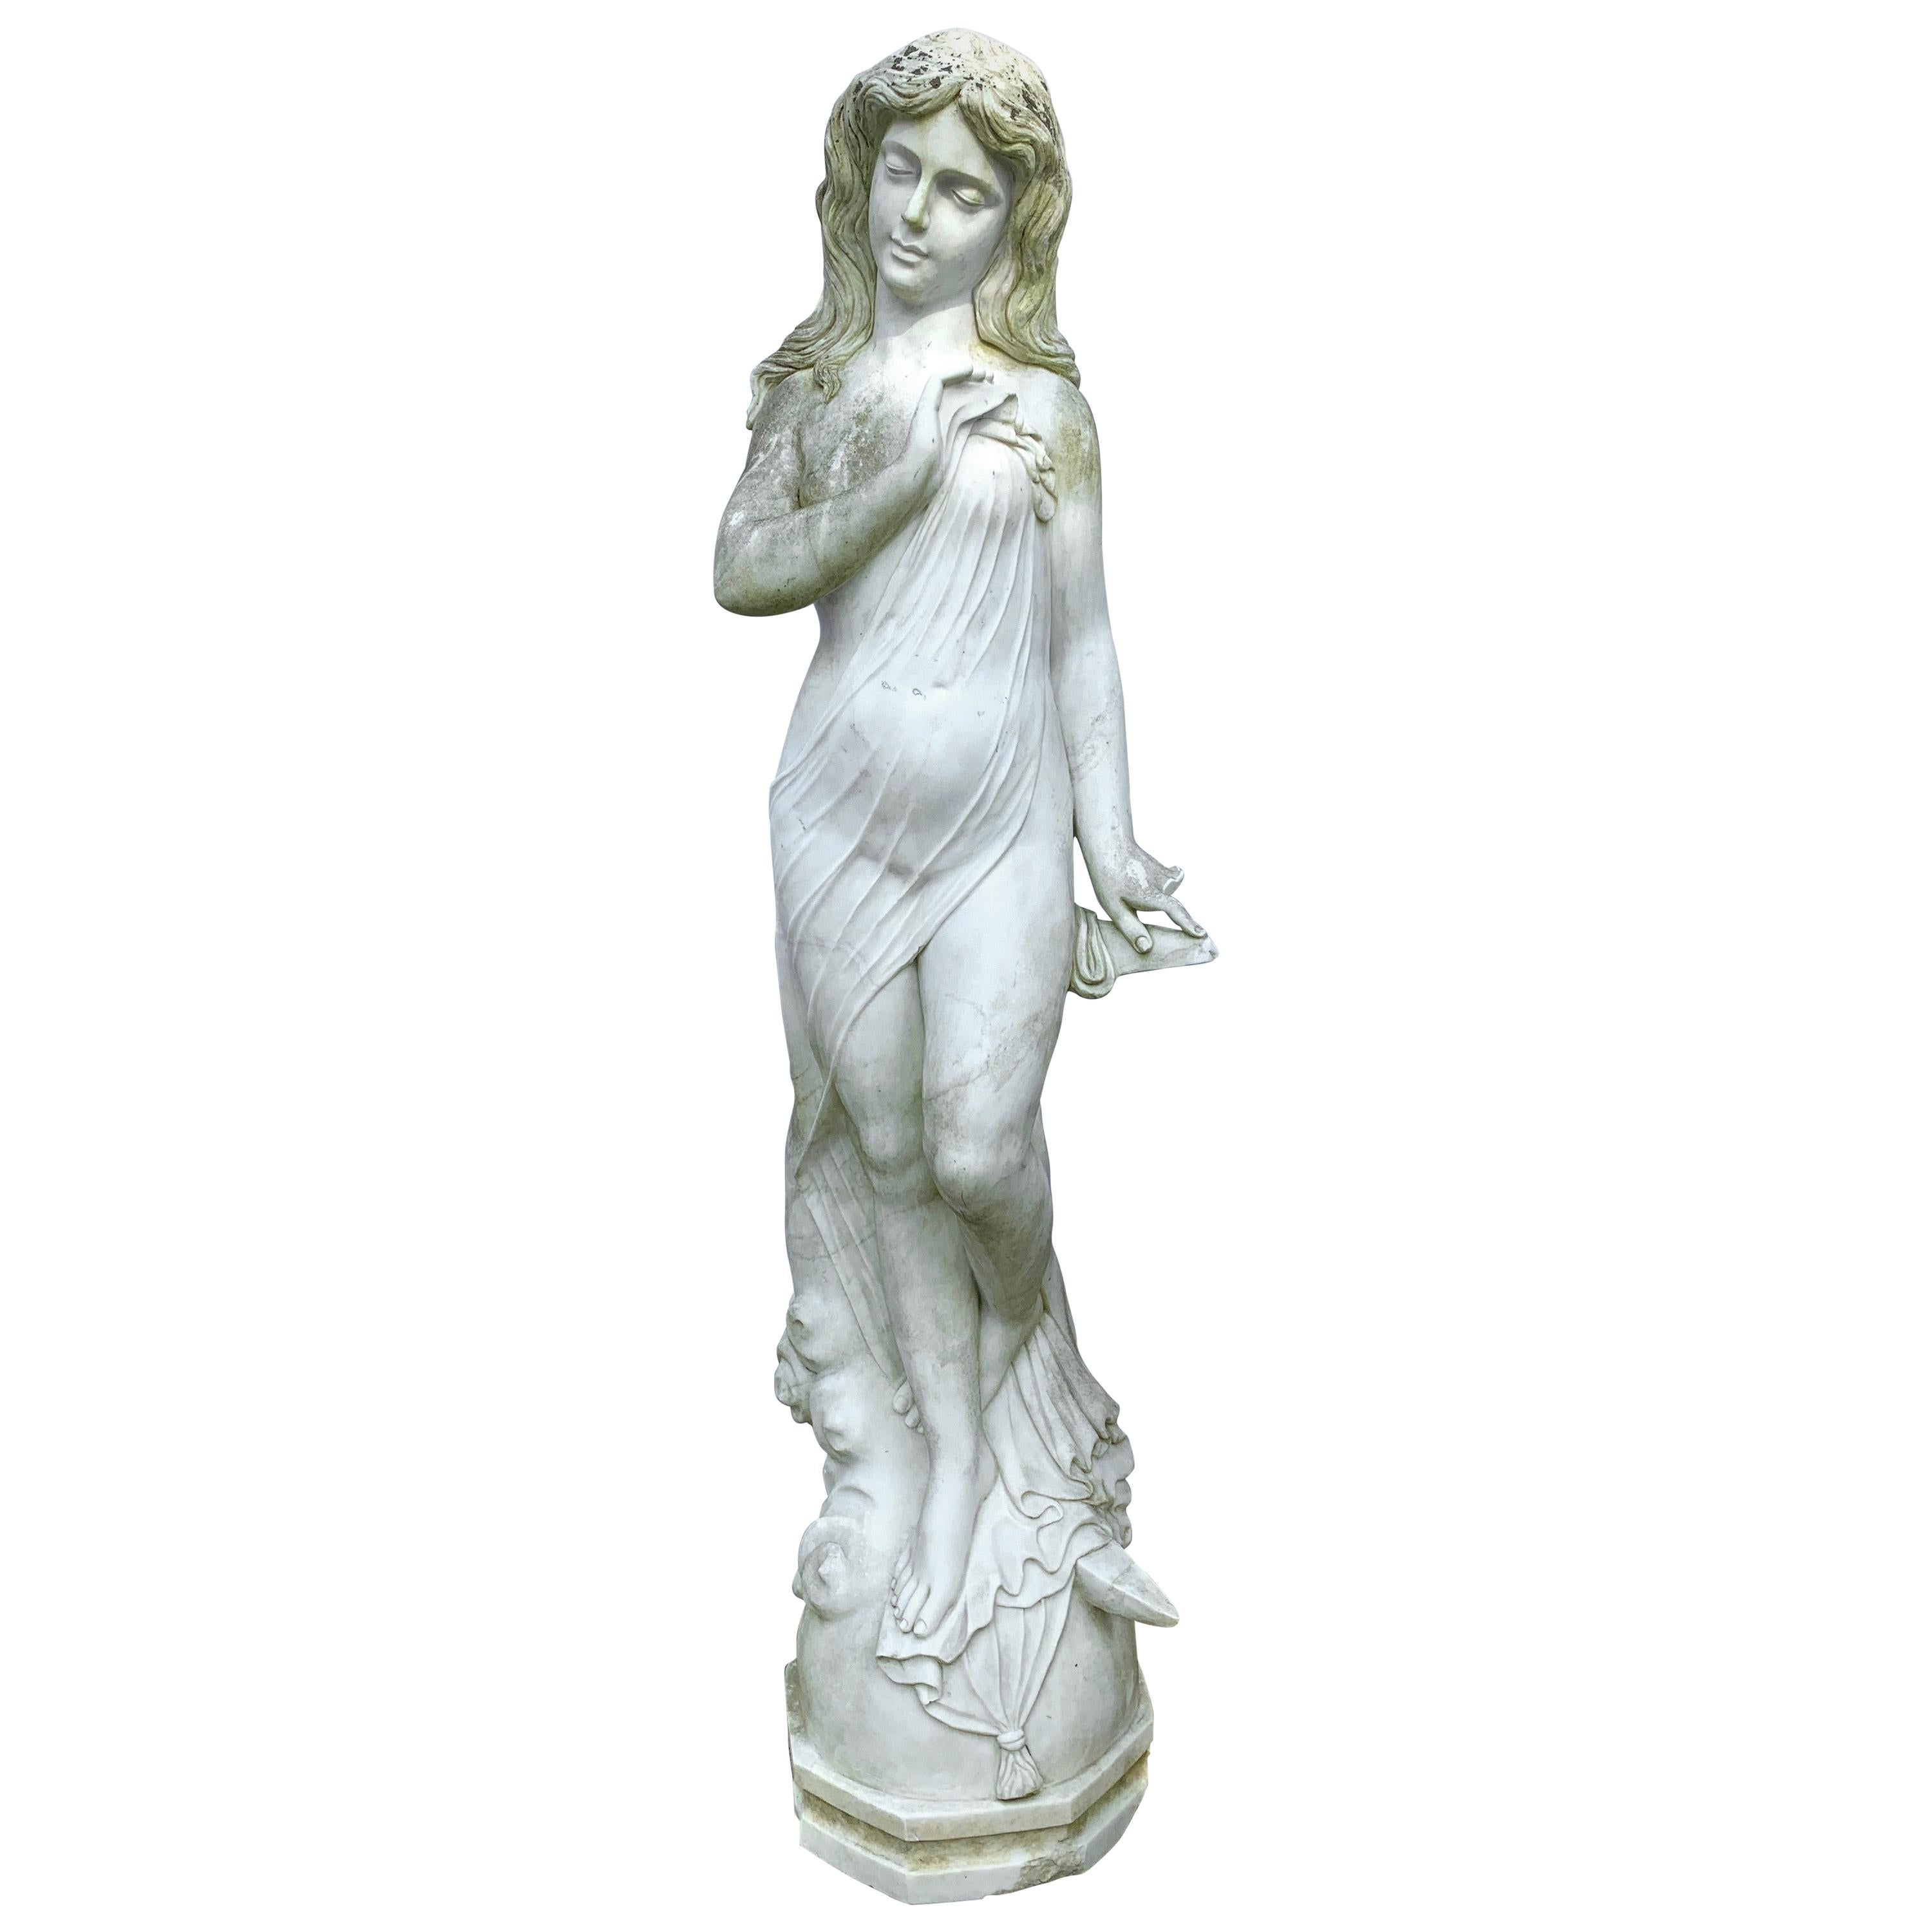 Neoclassical Greek Goddess Life-Size Marble Statue Sculpture